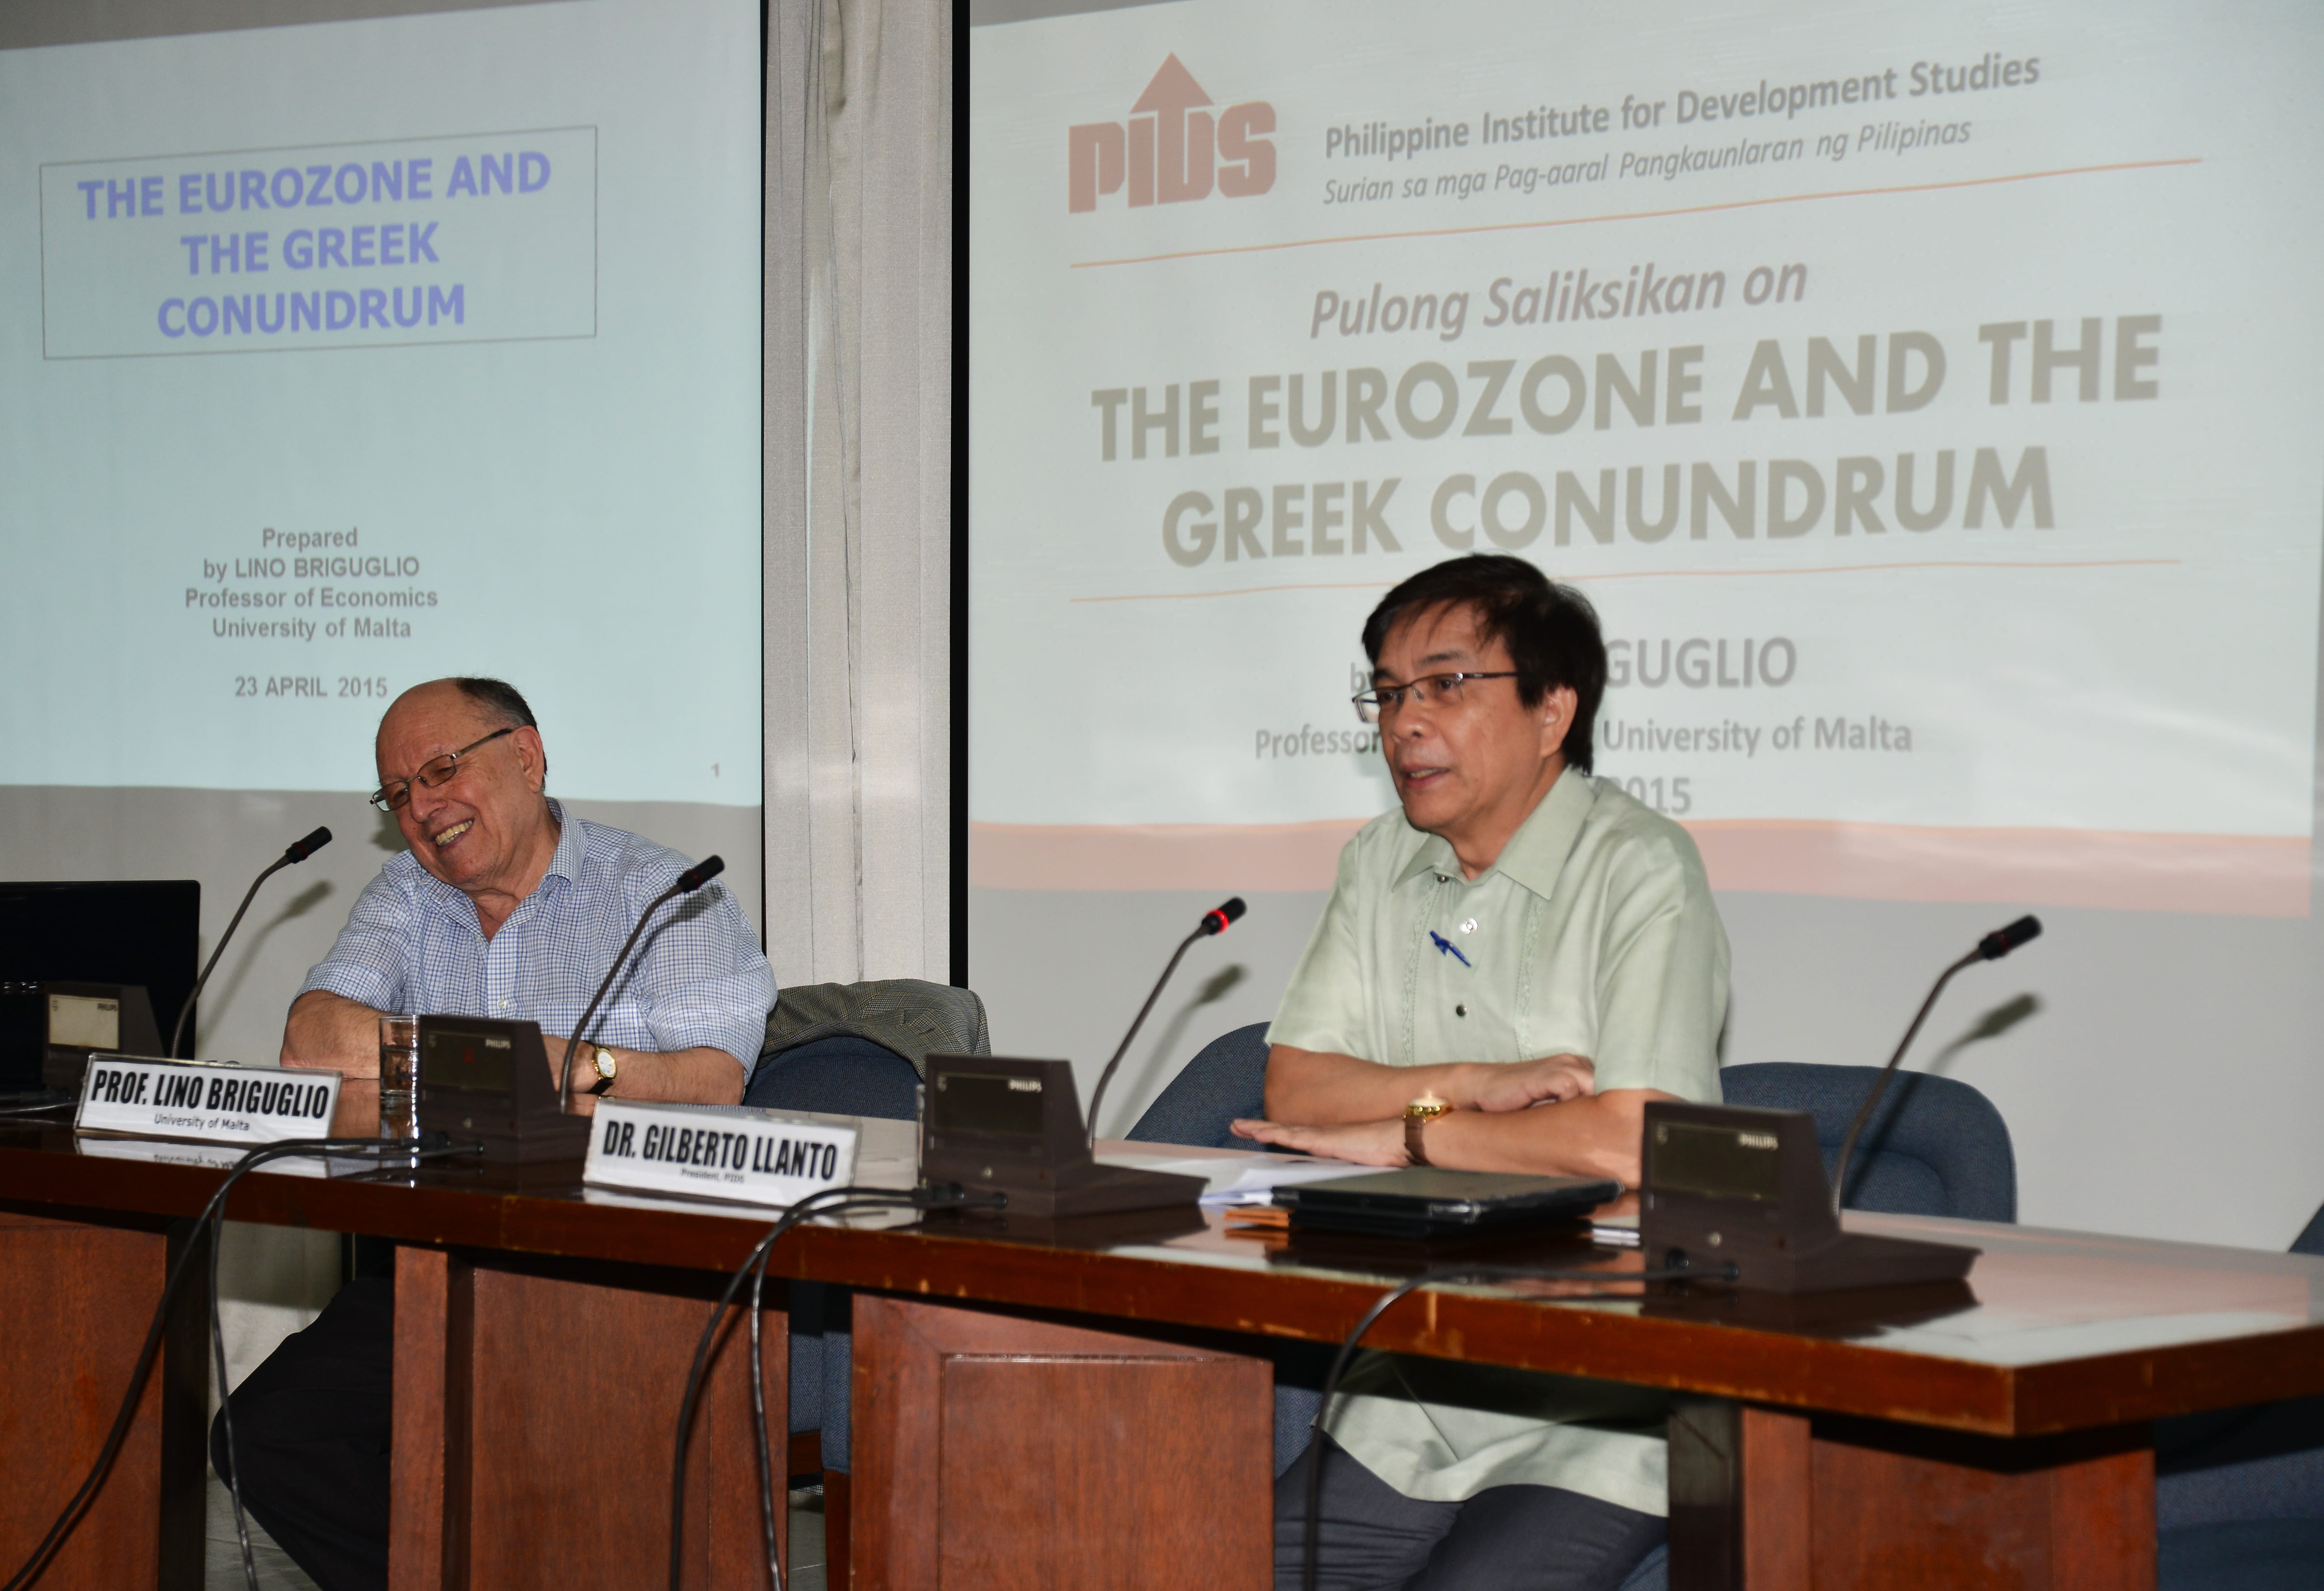 Pulong Saliksikan On The Eurozone And The Greek Conundrum-DSC_1257.jpg